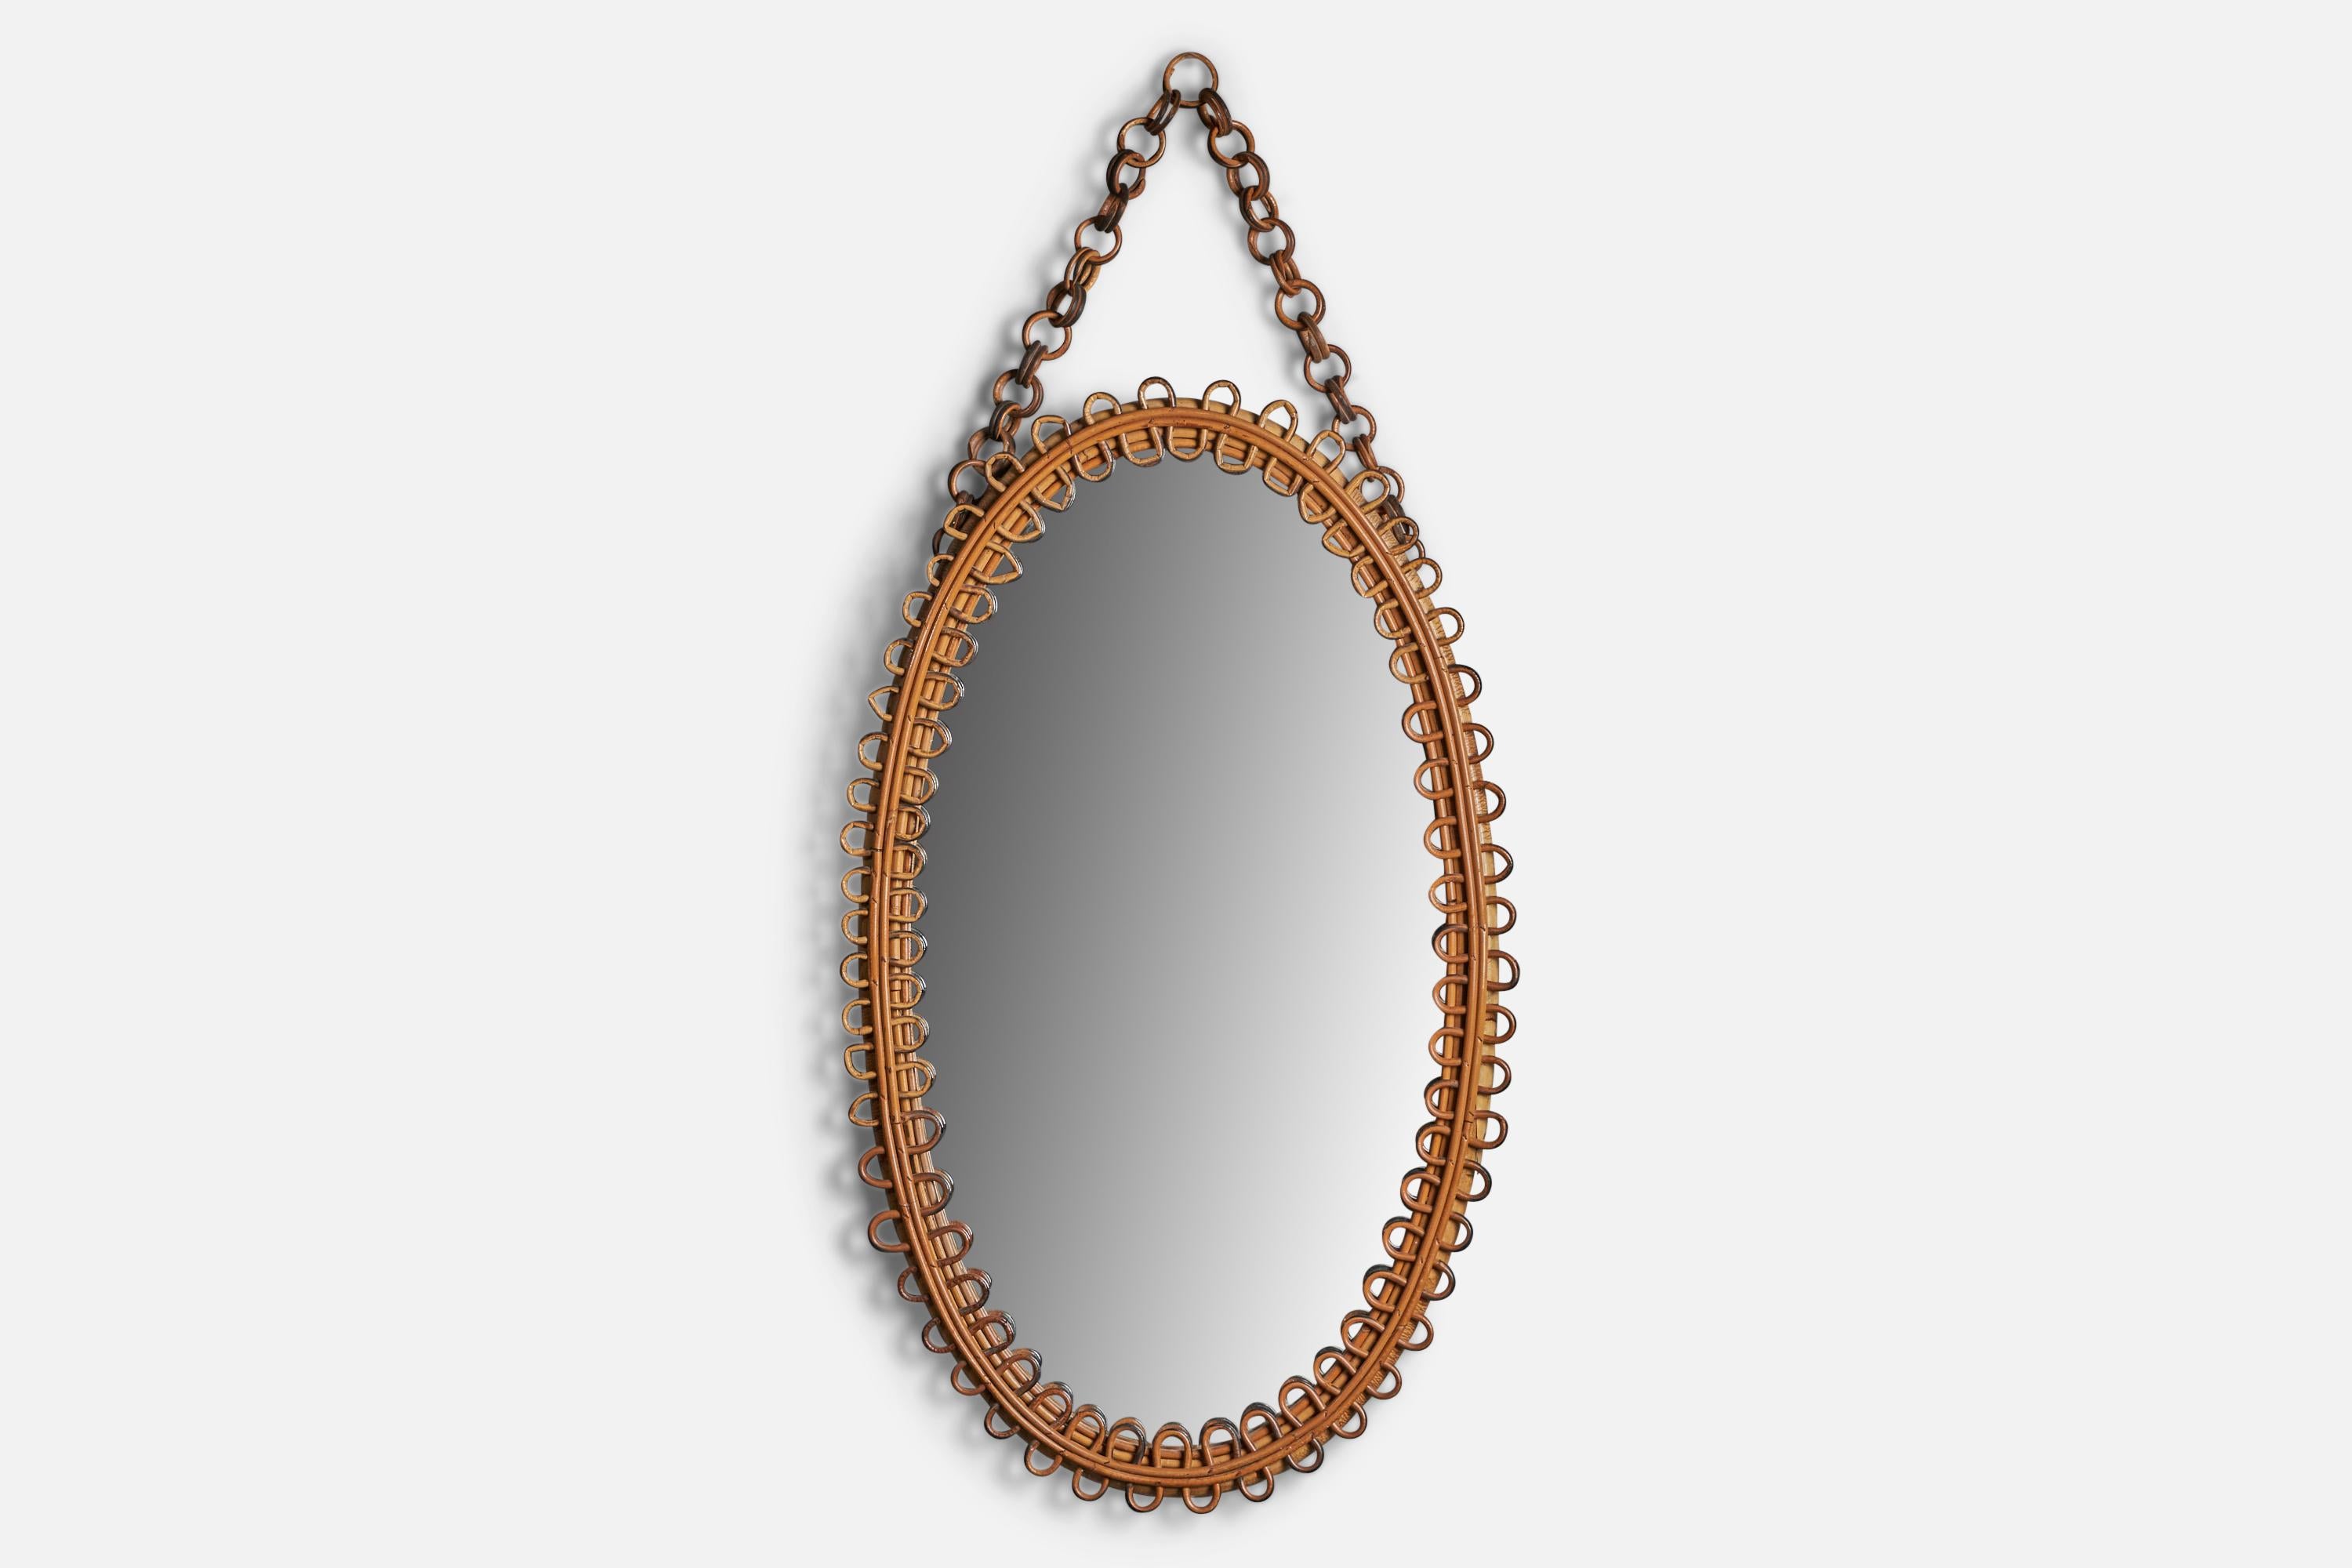 A rattan wall mirror designed and produced in Italy, 1950s.